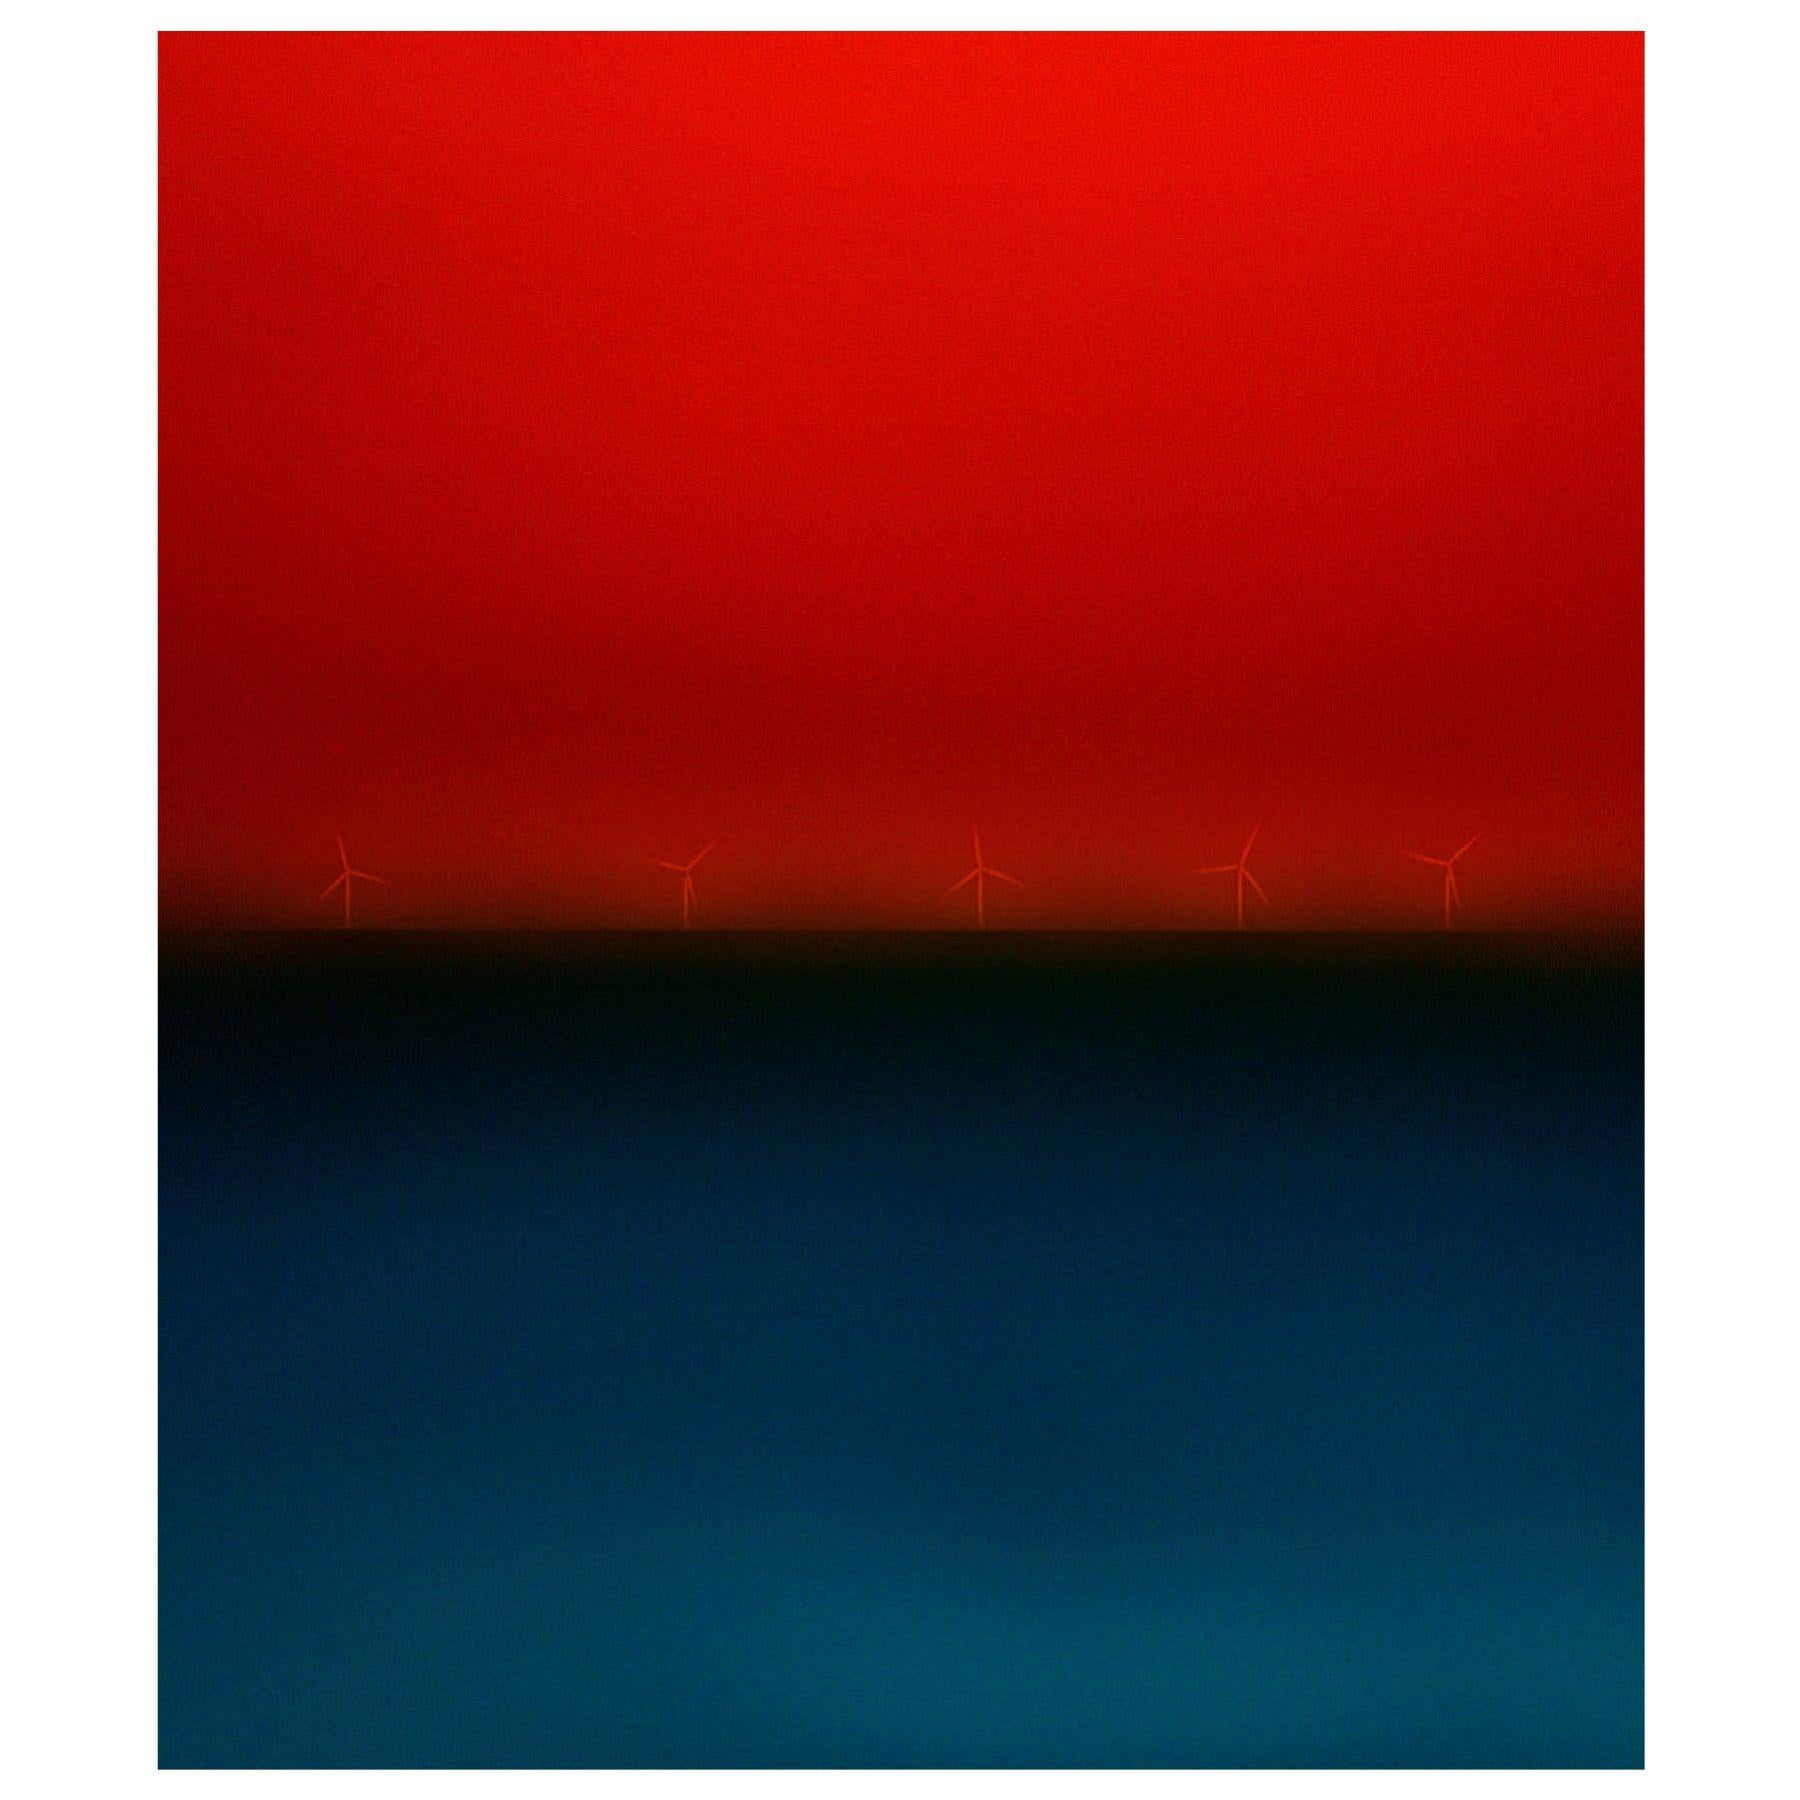 Andrew Blauschild Color Photograph - Offshore Winds